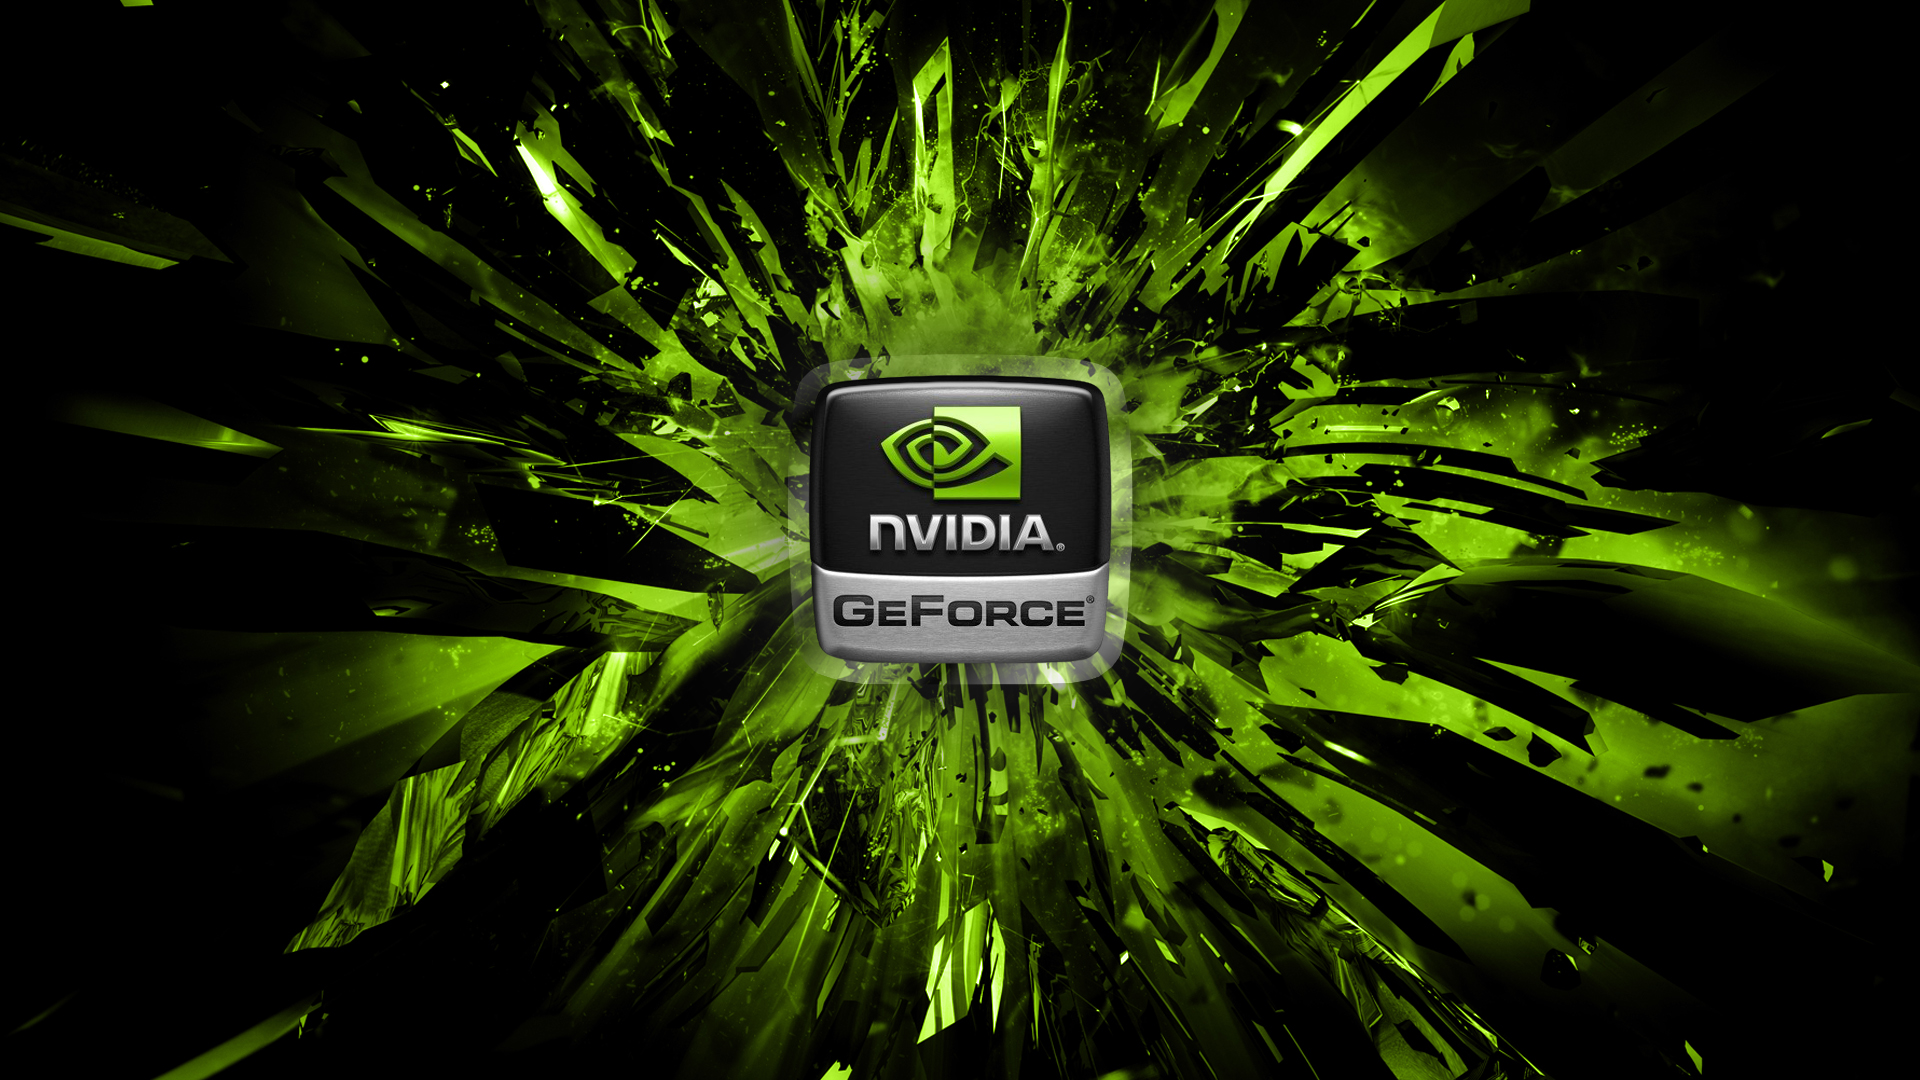 Nvidia Geforce Wallpaper HD For